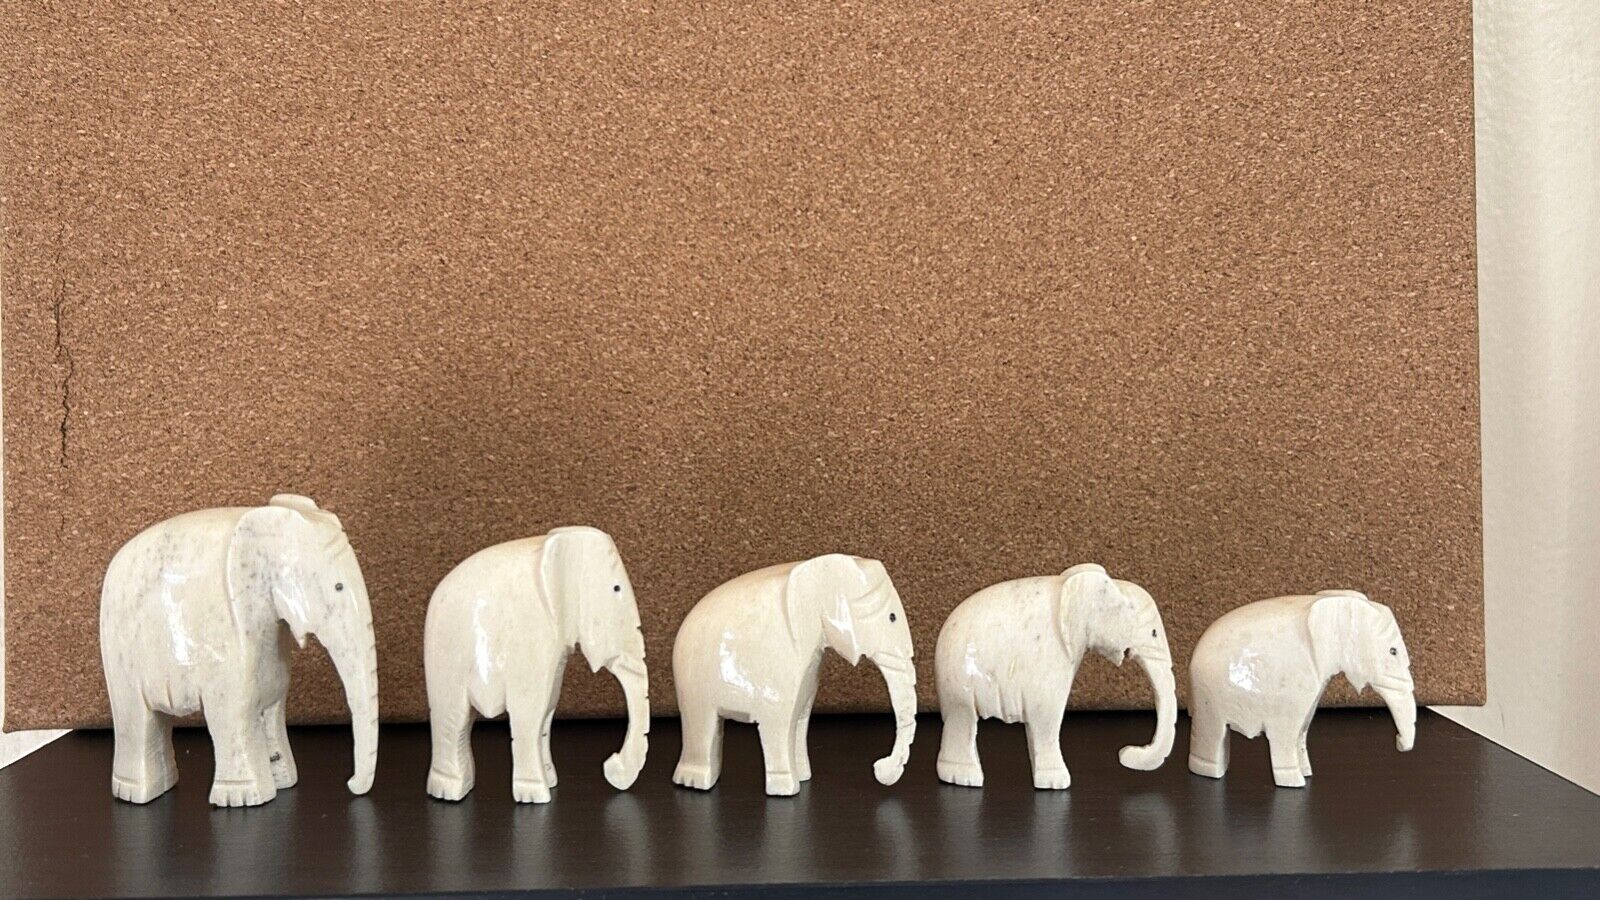 FIVE (5) CARVED ELEPHANT FIGURINES PACHYDERM HERD LOT